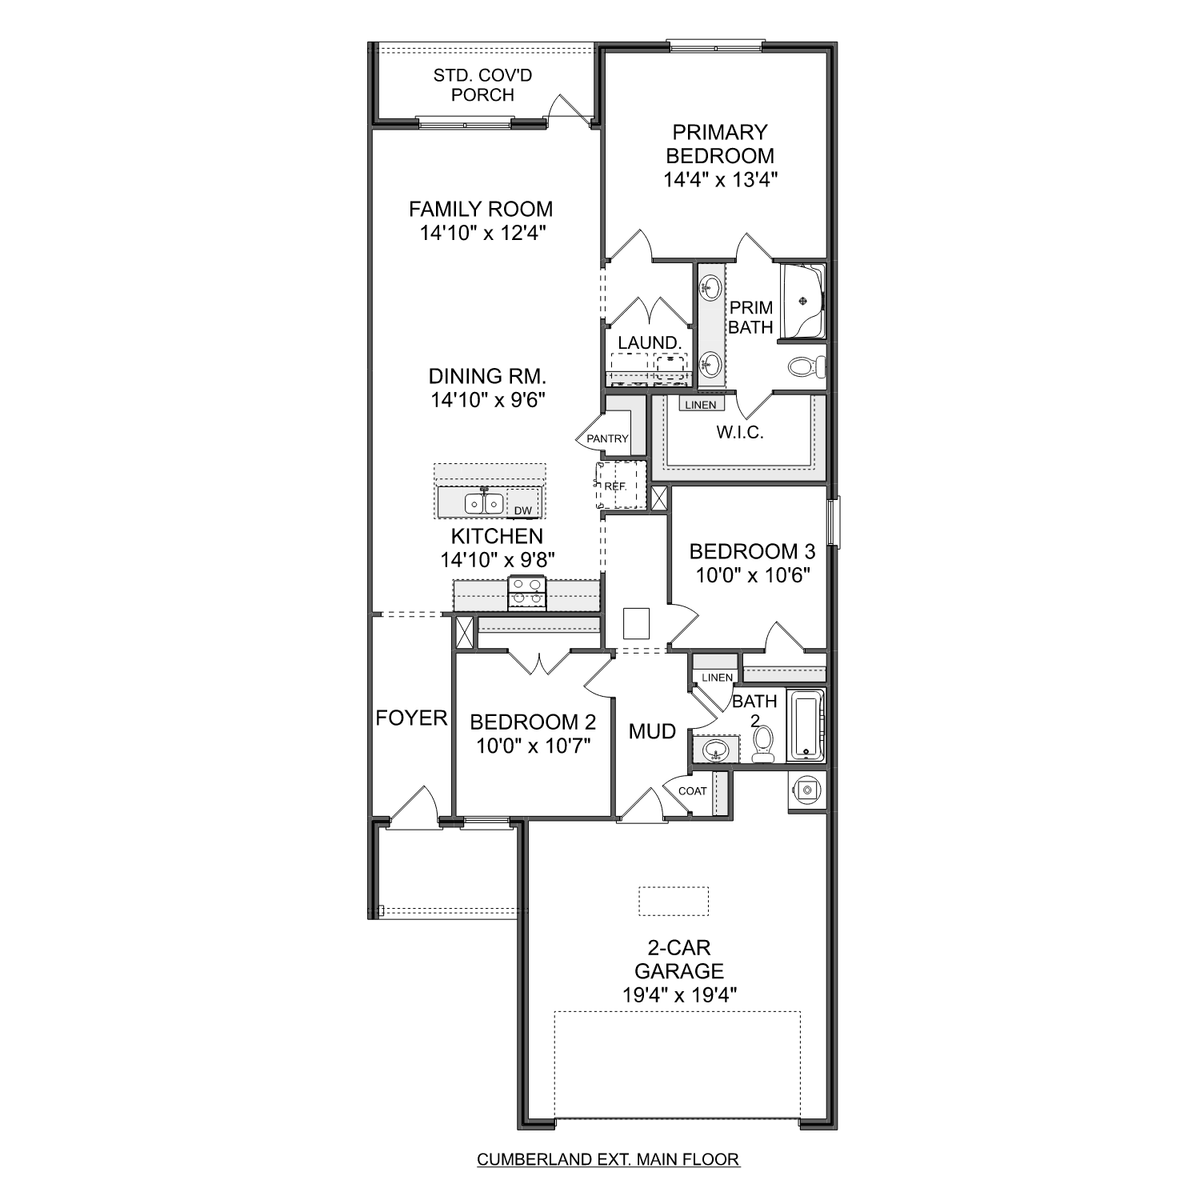 1 - The Cumberland B floor plan layout for 3146 Mead Way in Davidson Homes' Hollon Meadow community.